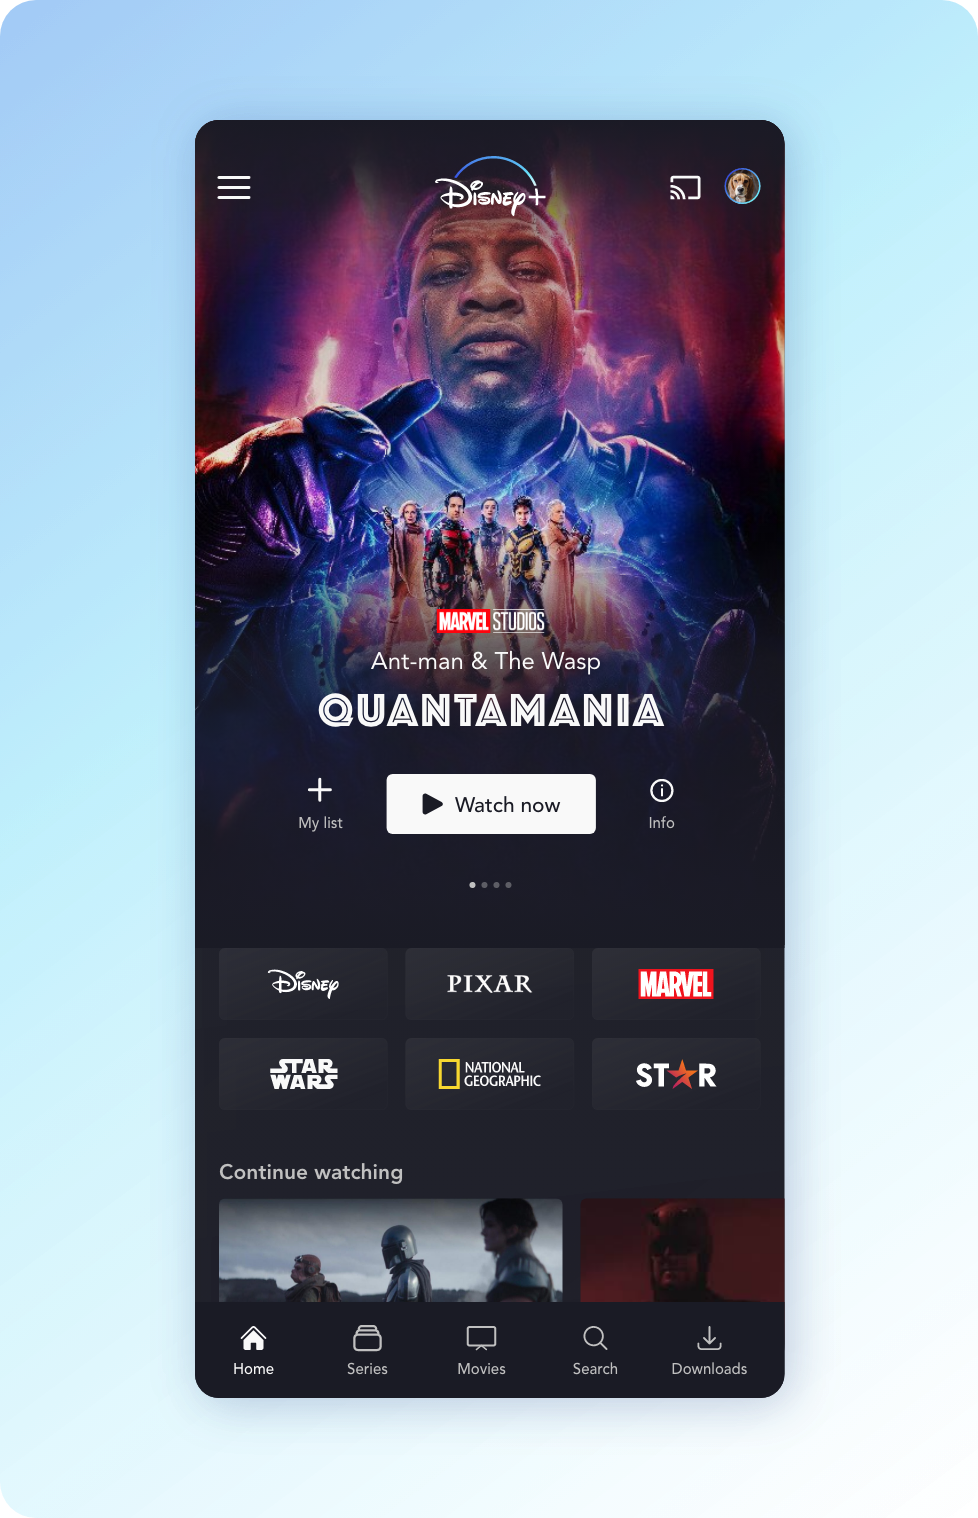 A complete mockup of my Disney+ redesign, featuring Marvel’s Ant-man and the Wasp: Quantamania, Disney’s collections, the shows users could continue watching and the new top and bottom navigation.